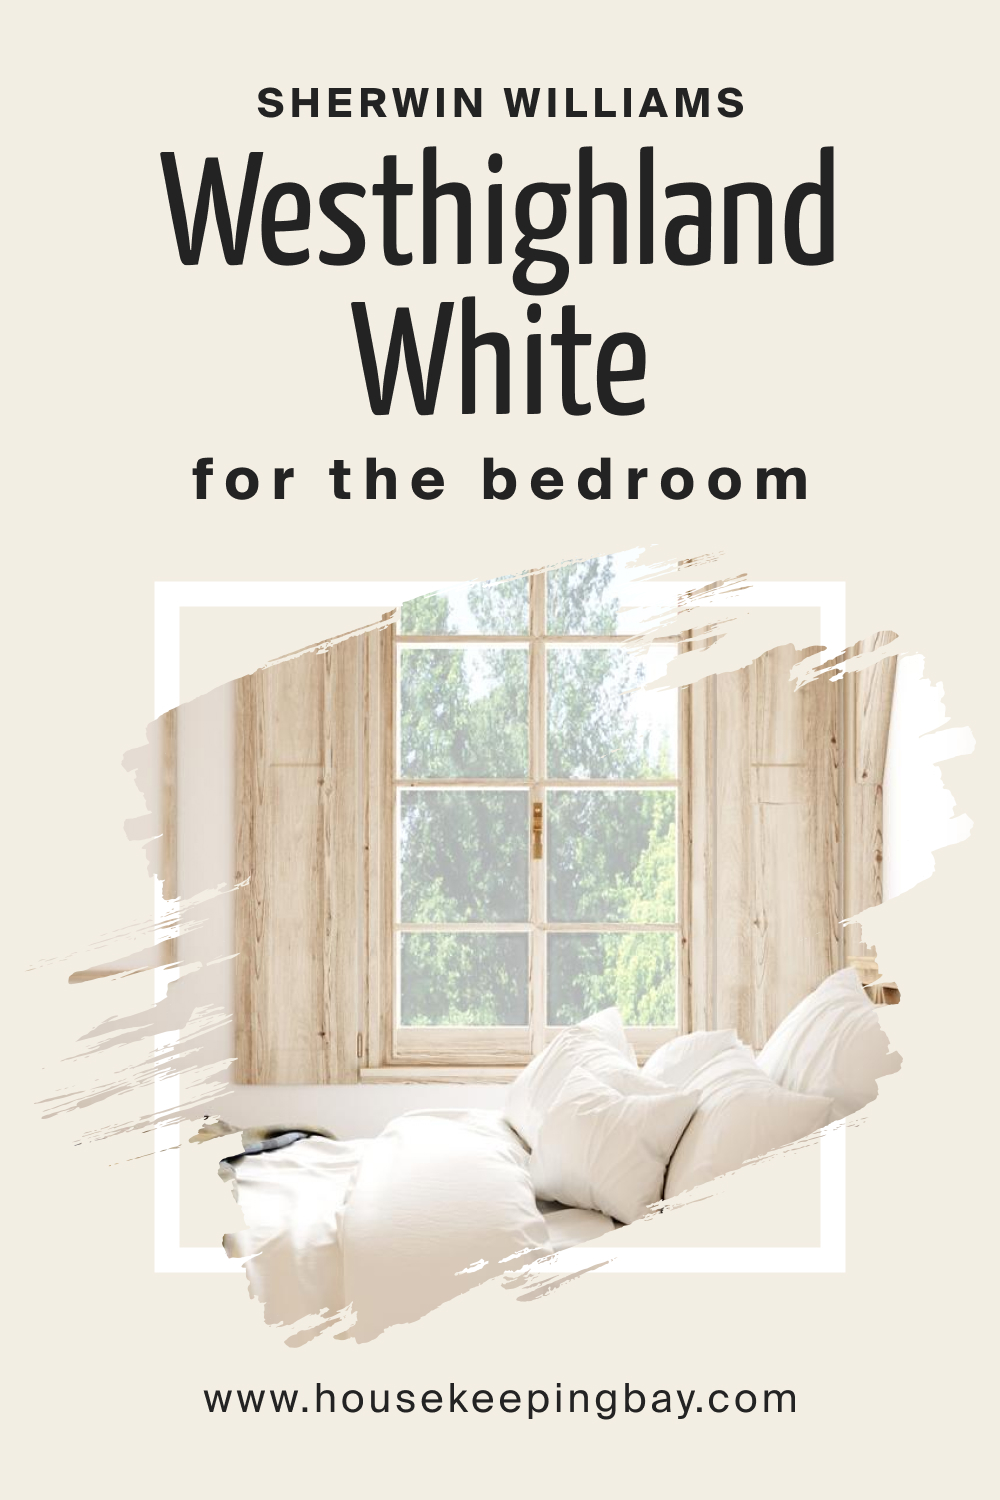 Sherwin Williams. Westhighland White SW 7566 For the bedroom